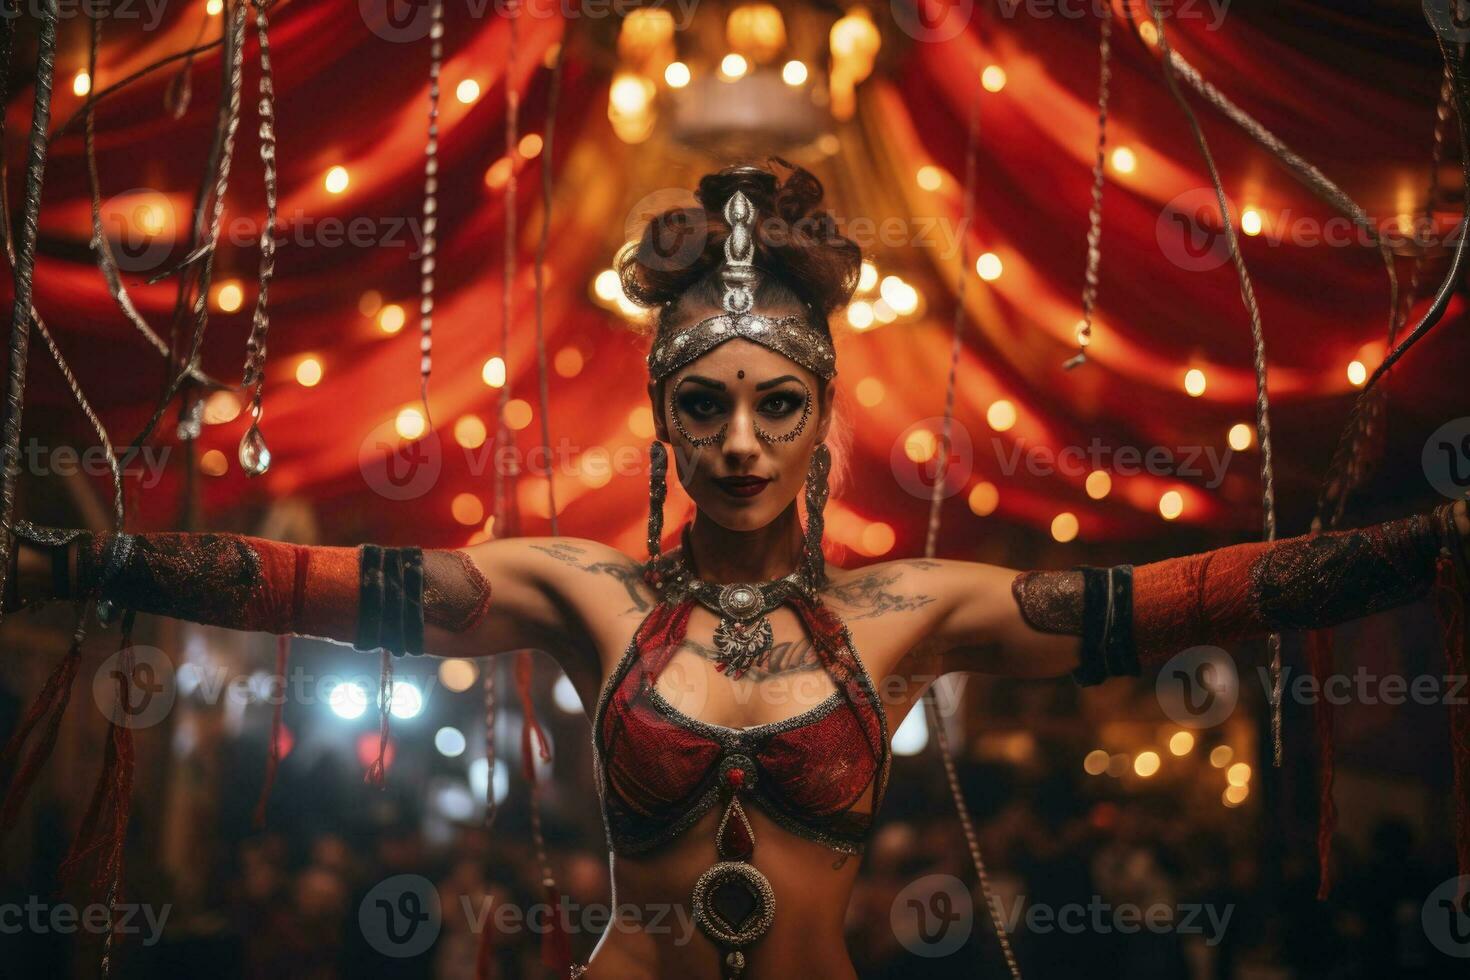 Elevated spectacle of spinning hoop artist under bejeweled circus tent canopy photo